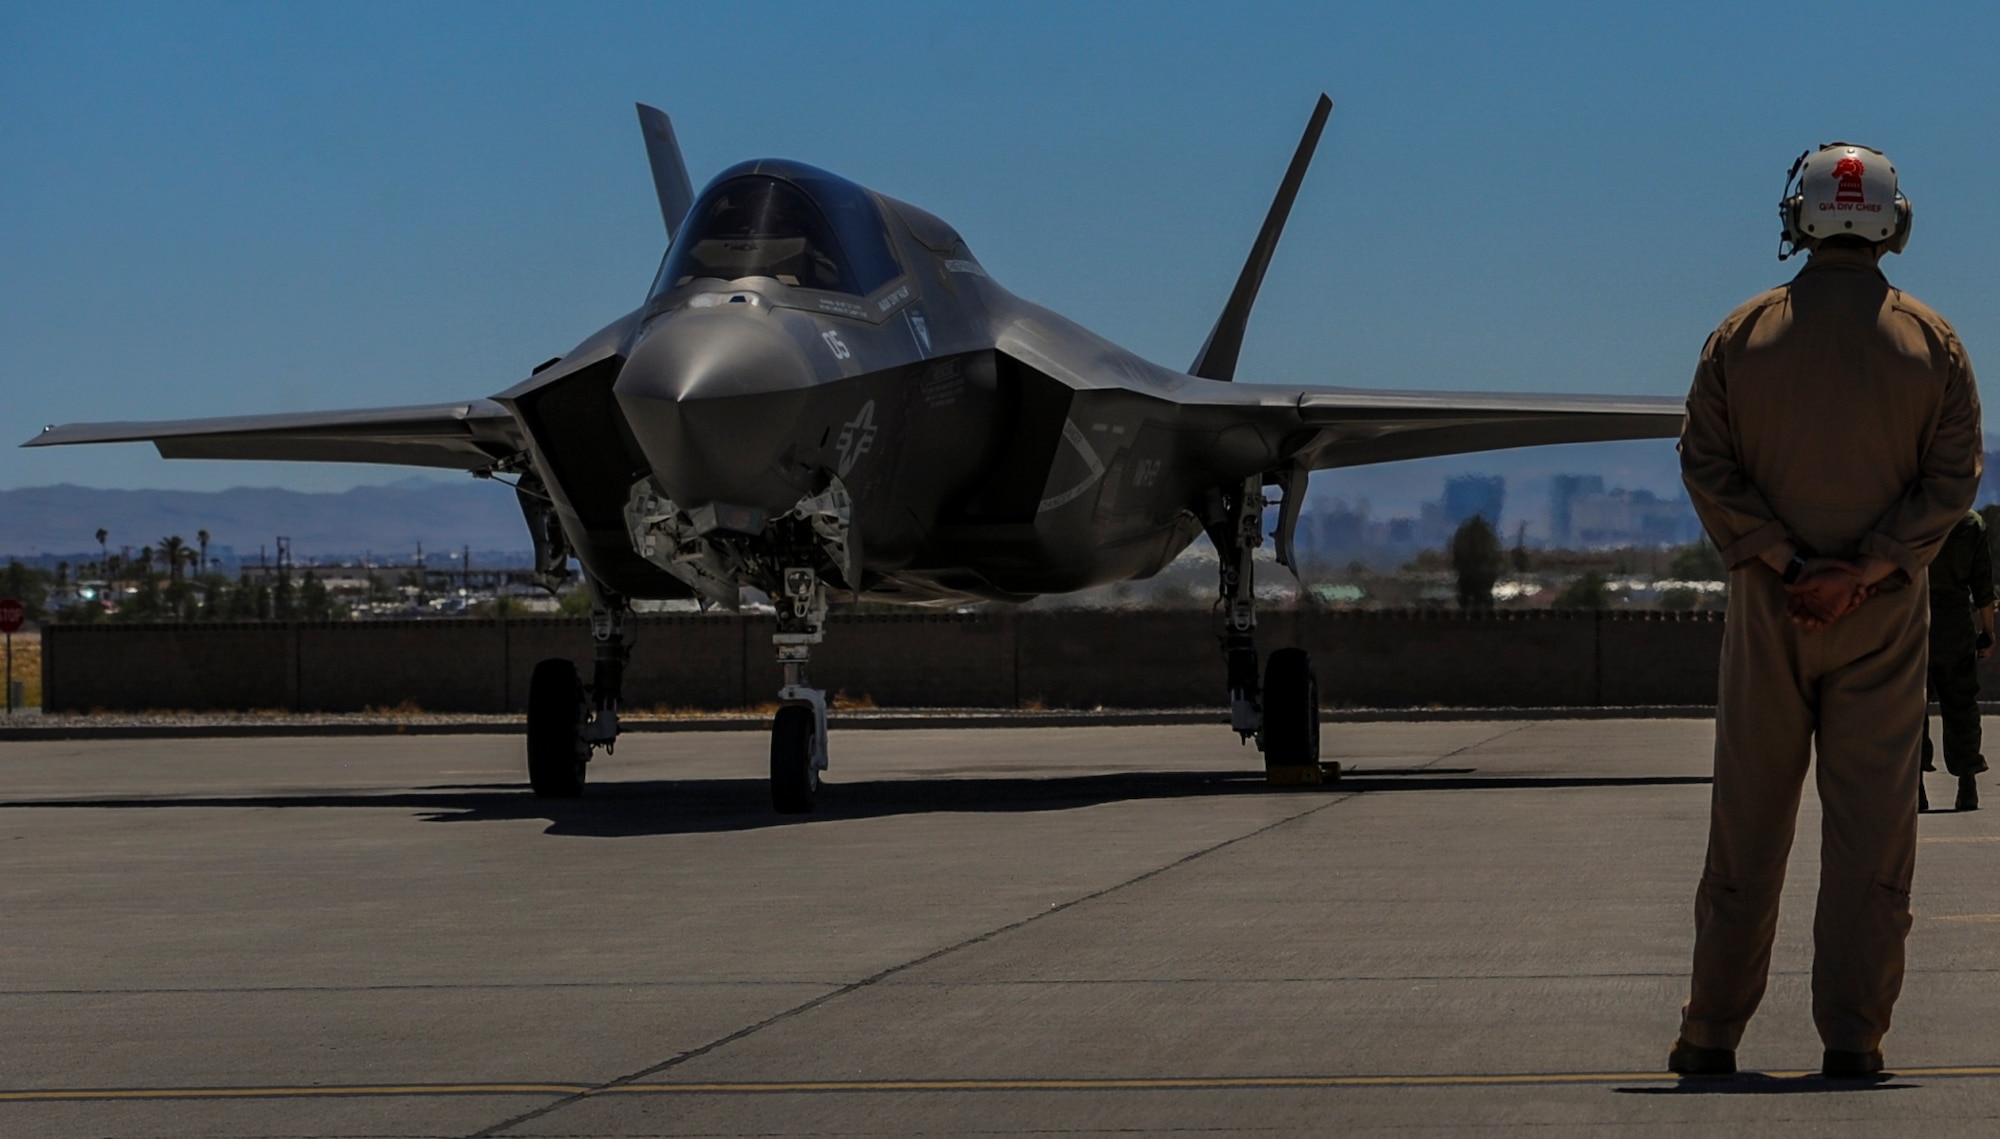 An F-35B, assigned to the 3rd Marine Aircraft Wing, Marine Corps Air Station Yuma, Az., prepares to take off during Red Flag 16-3 at Nellis Air Force Base, Nev., July 12, 2016. Air-to-air combat training exercise is conducted over the 2.9 million acre Nevada Test and Training Range during Red Flag. (U.S. Air Force photo by airman 1st Class Kevin Tanenbaum)